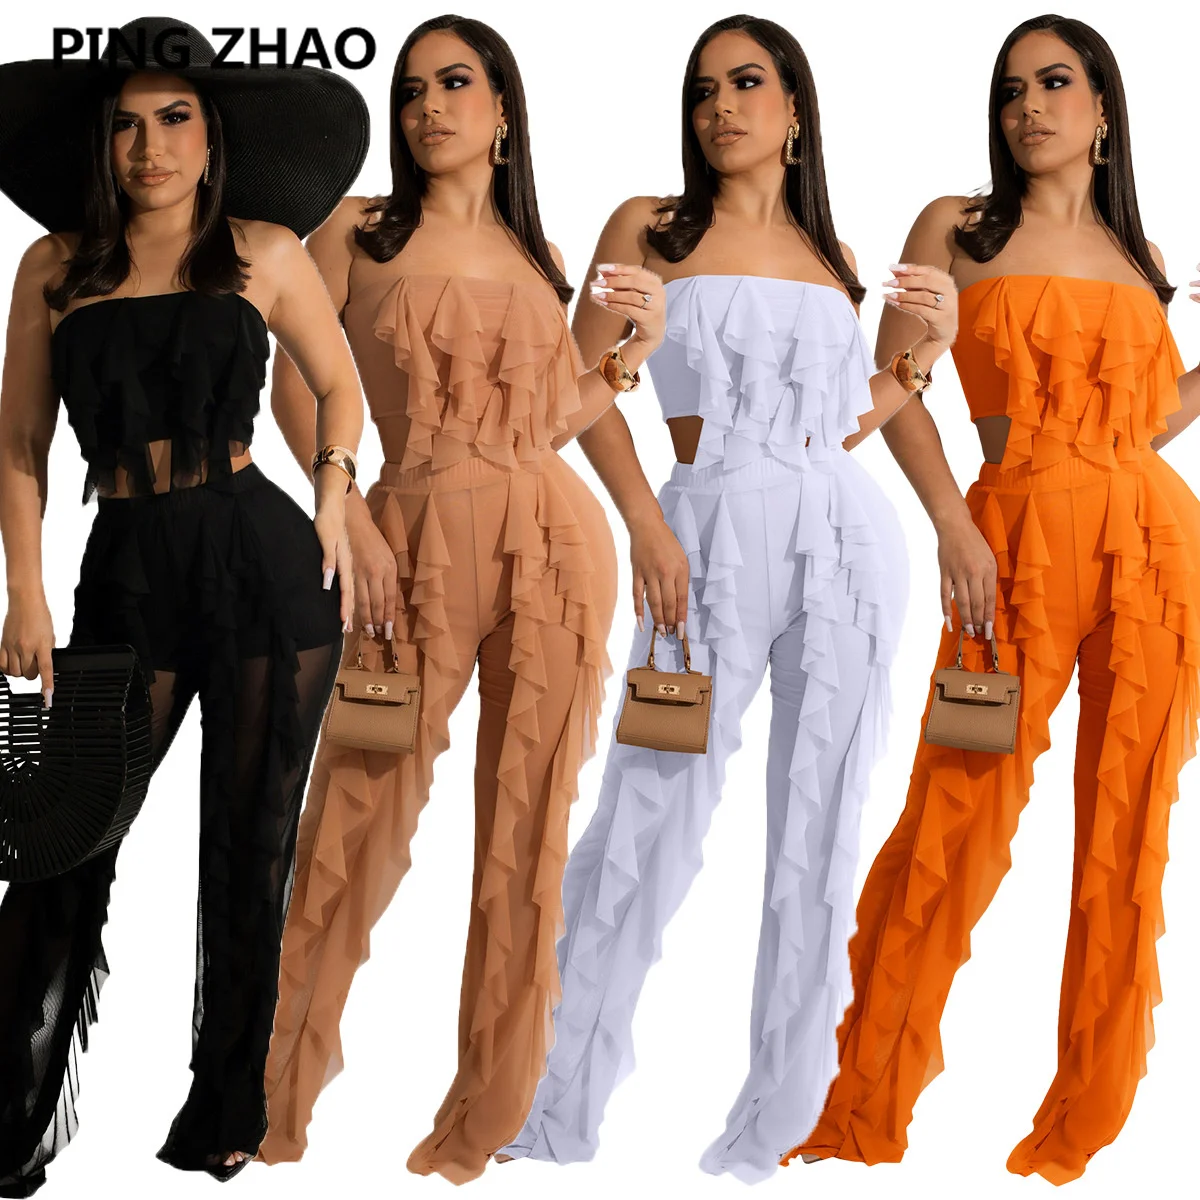 

PING ZHAO Mesh See Though Beach Sexy Women Set Strapless Crop Tops and Ruffles Pants Set Tracksuit Two Piece Set Outfit